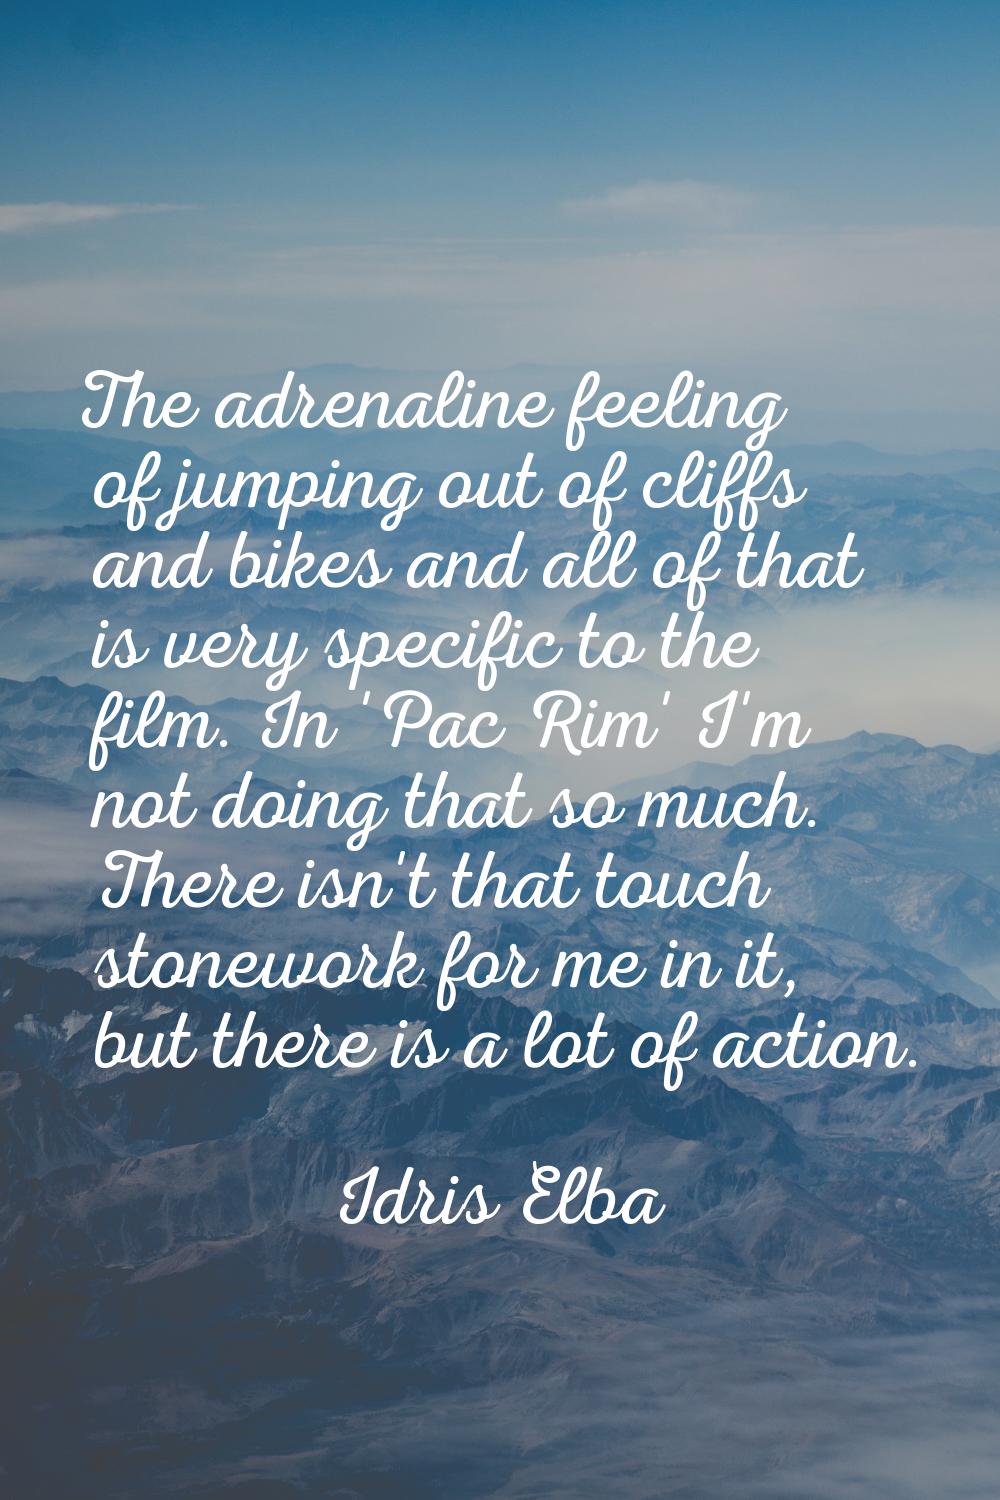 The adrenaline feeling of jumping out of cliffs and bikes and all of that is very specific to the f